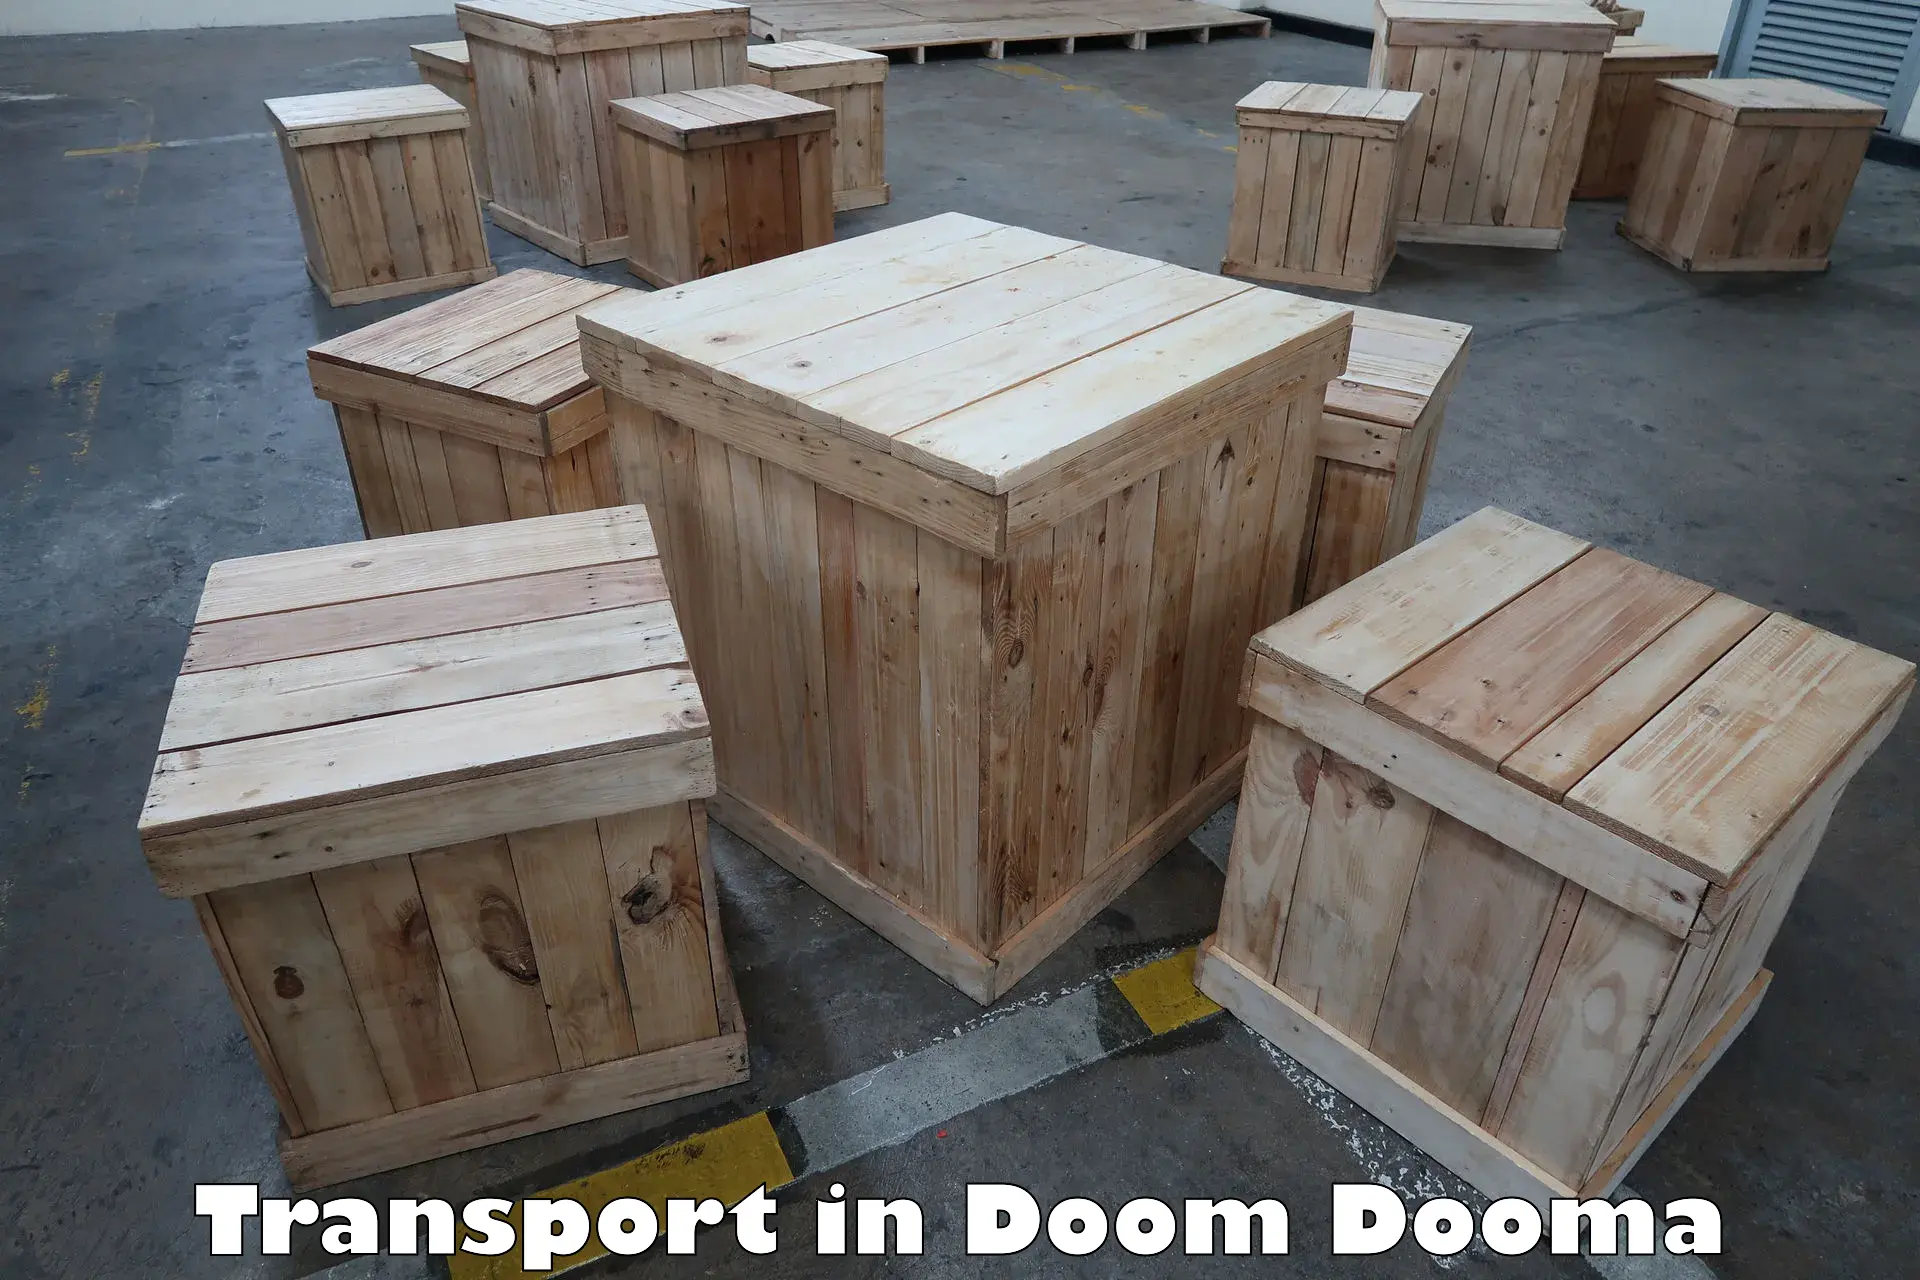 Cycle transportation service in Doom Dooma